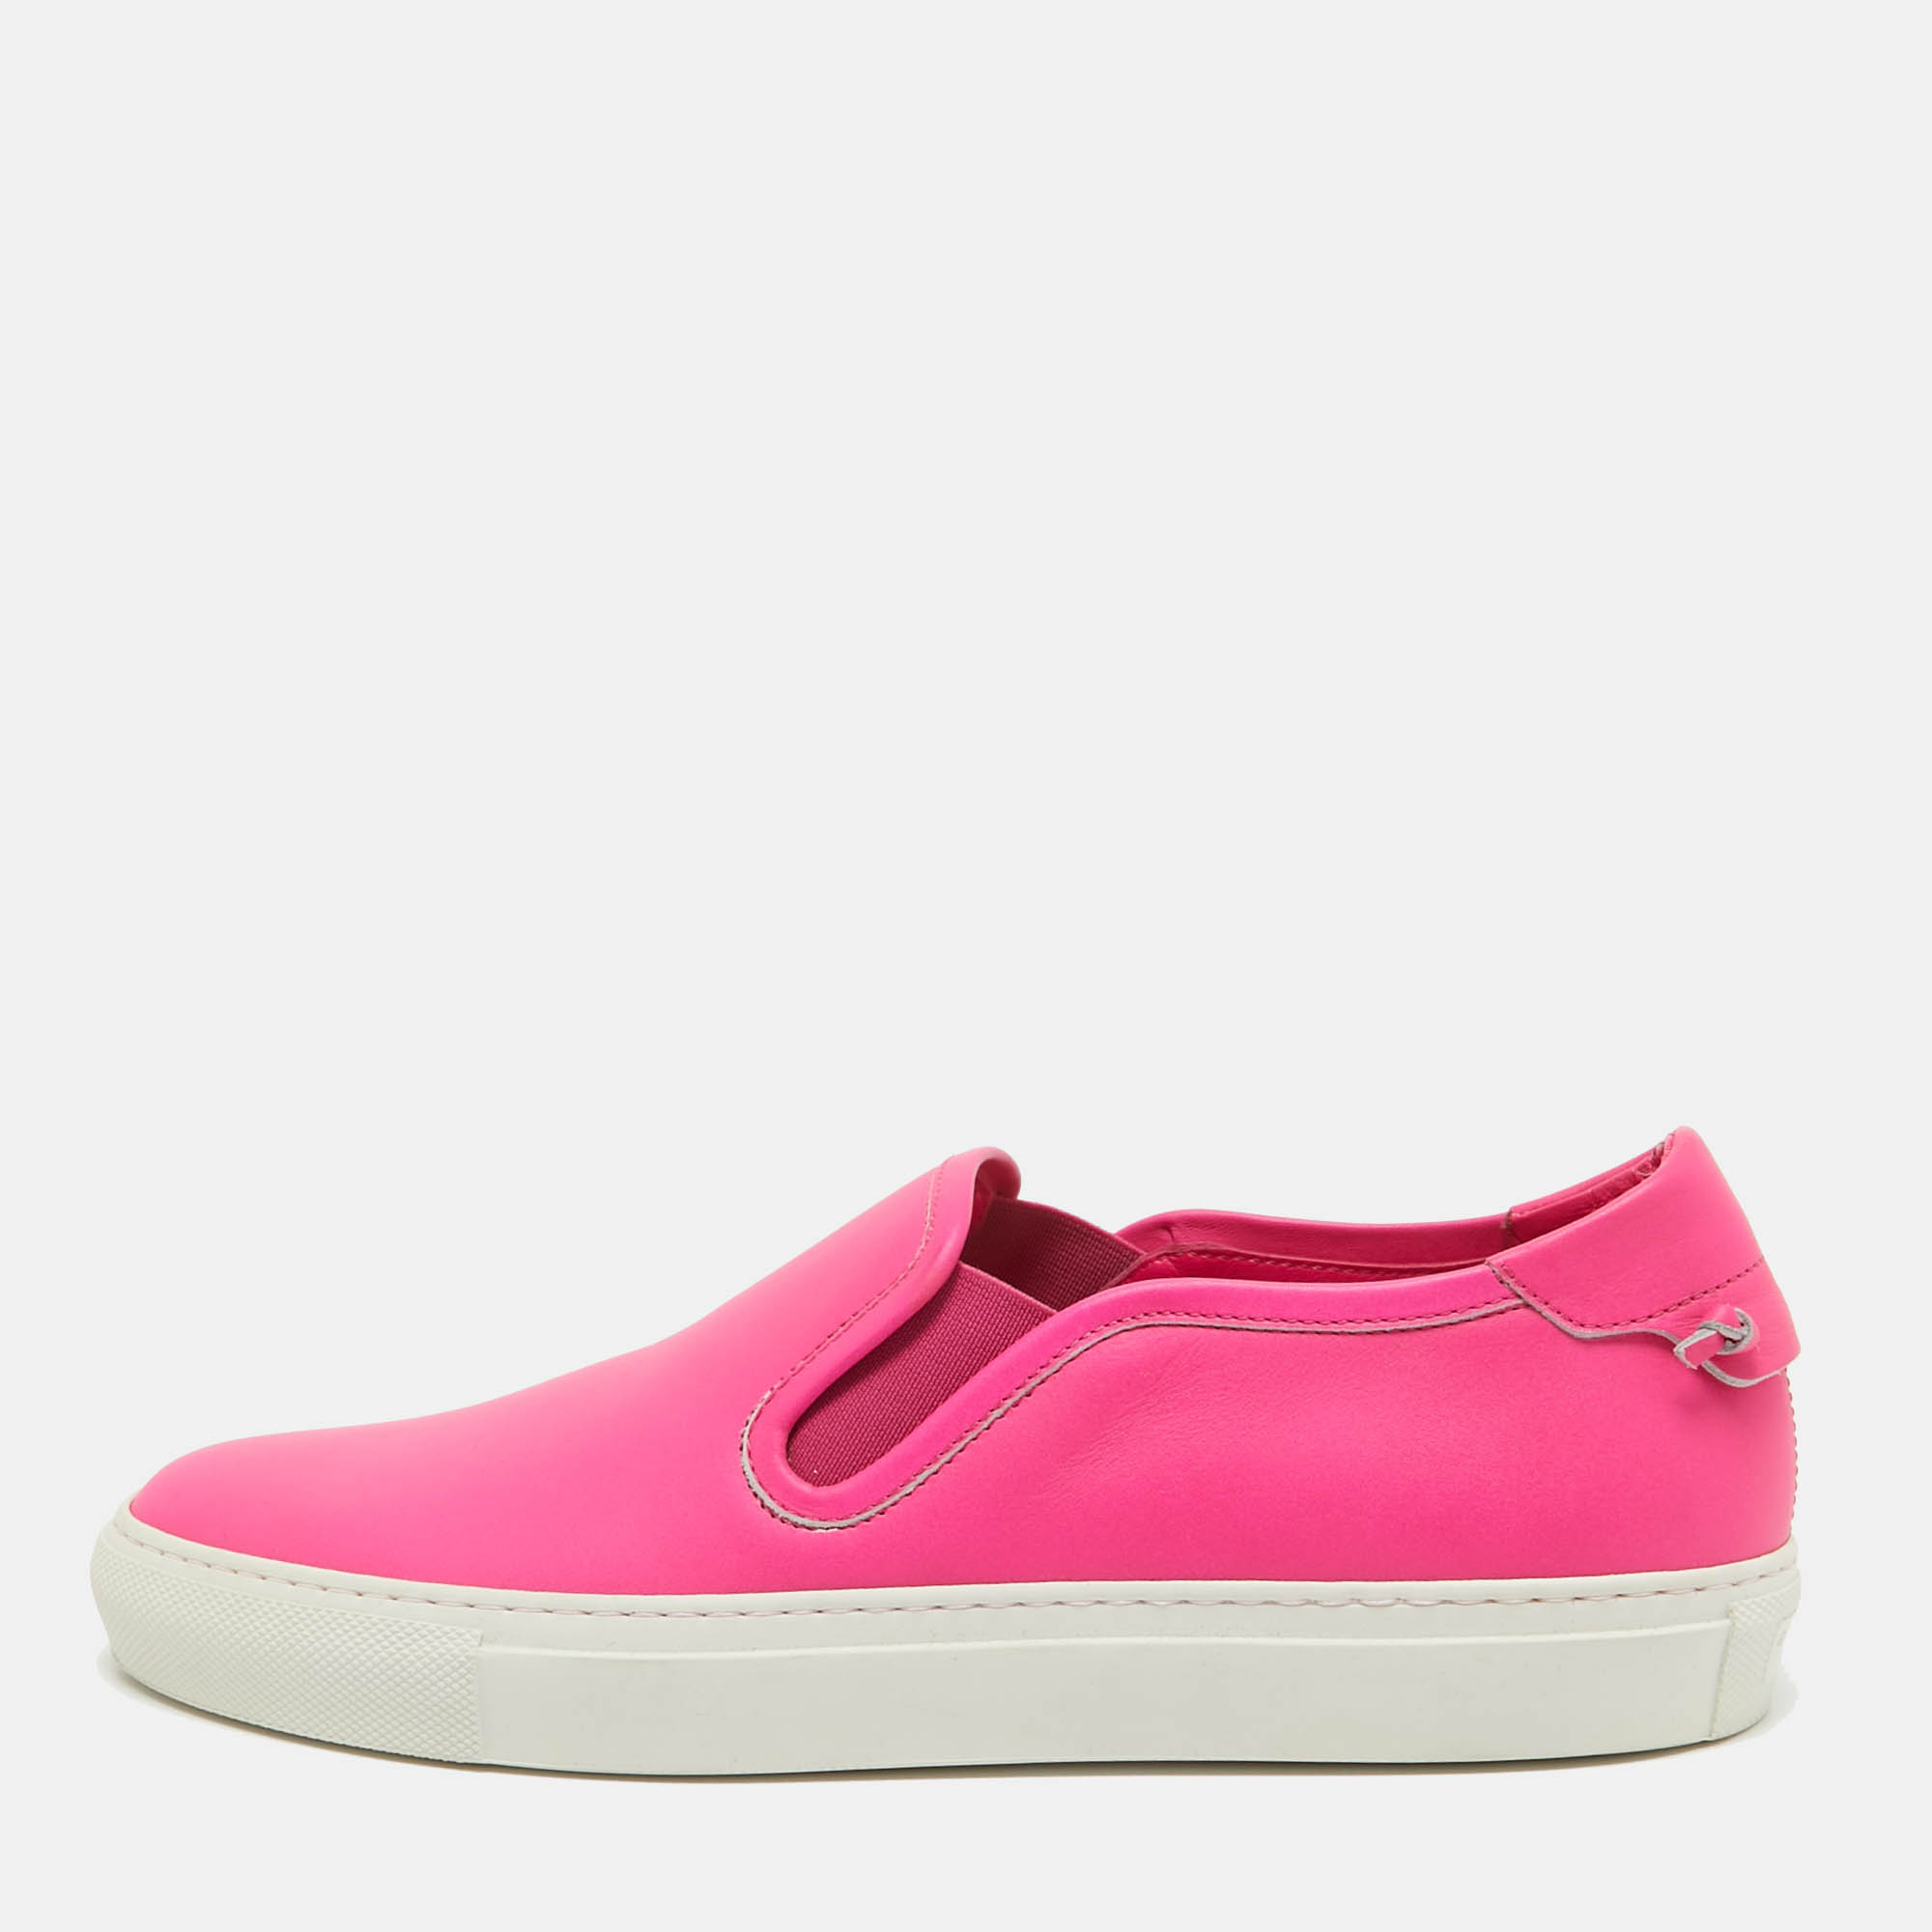 Pre-owned Givenchy Pink Leather Slip On Sneakers Size 40